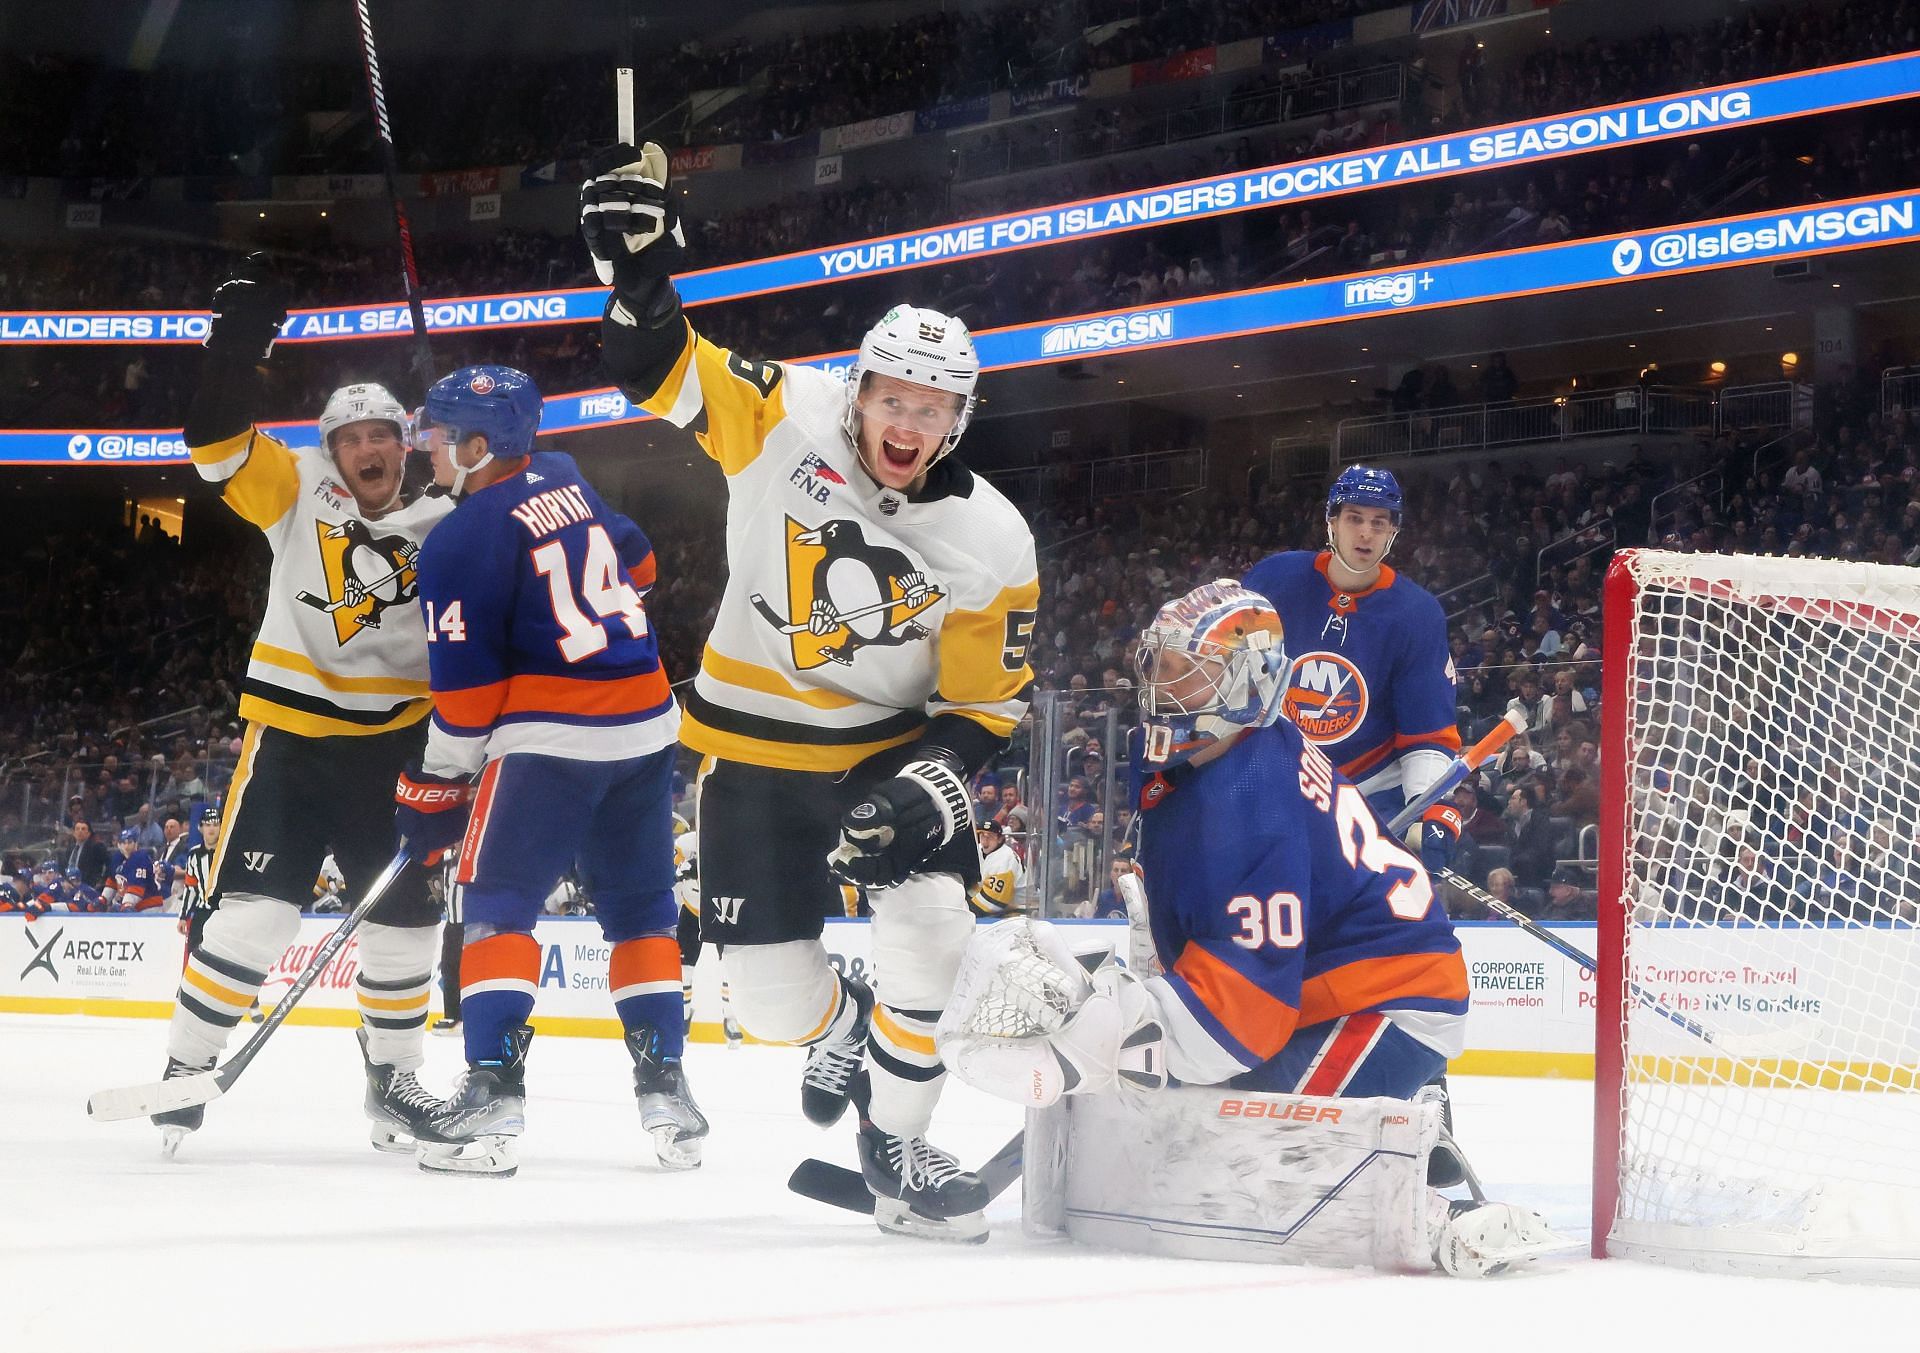 Jake Guentzel could score for the New York Islanders instead of against them.